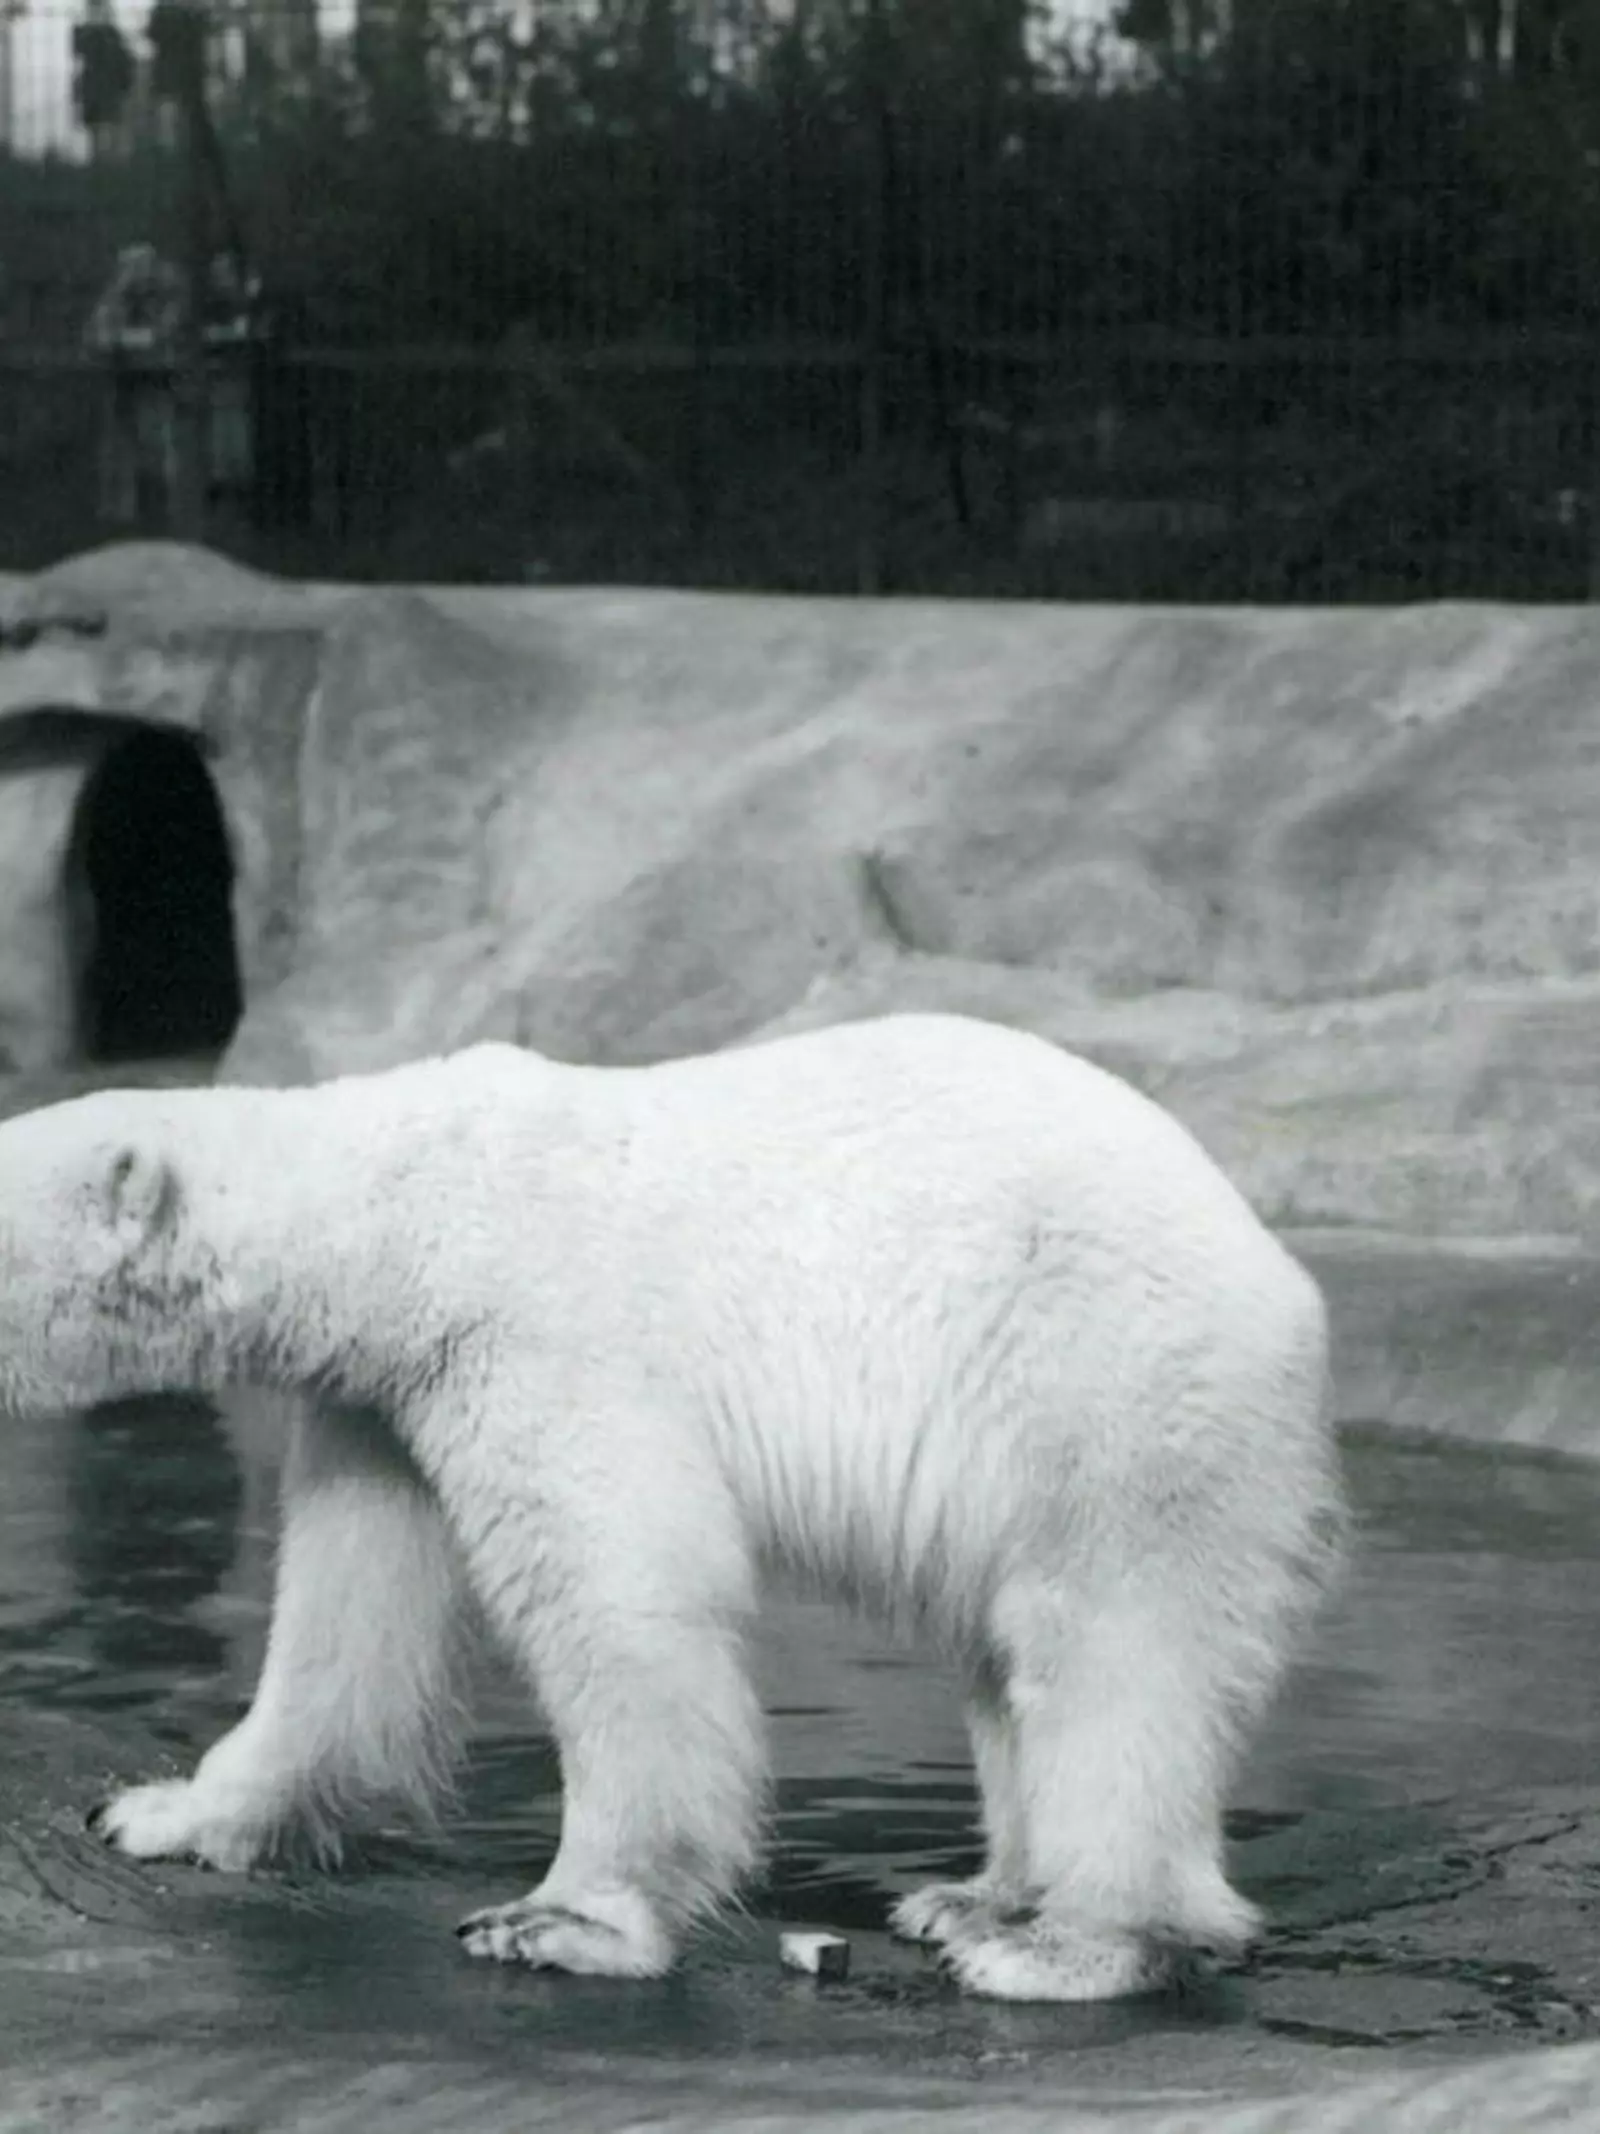 A Polar Bear at the edge of its pool in Whipsnade in 1937. Some visitors are watching from above, behind the barrier fence.